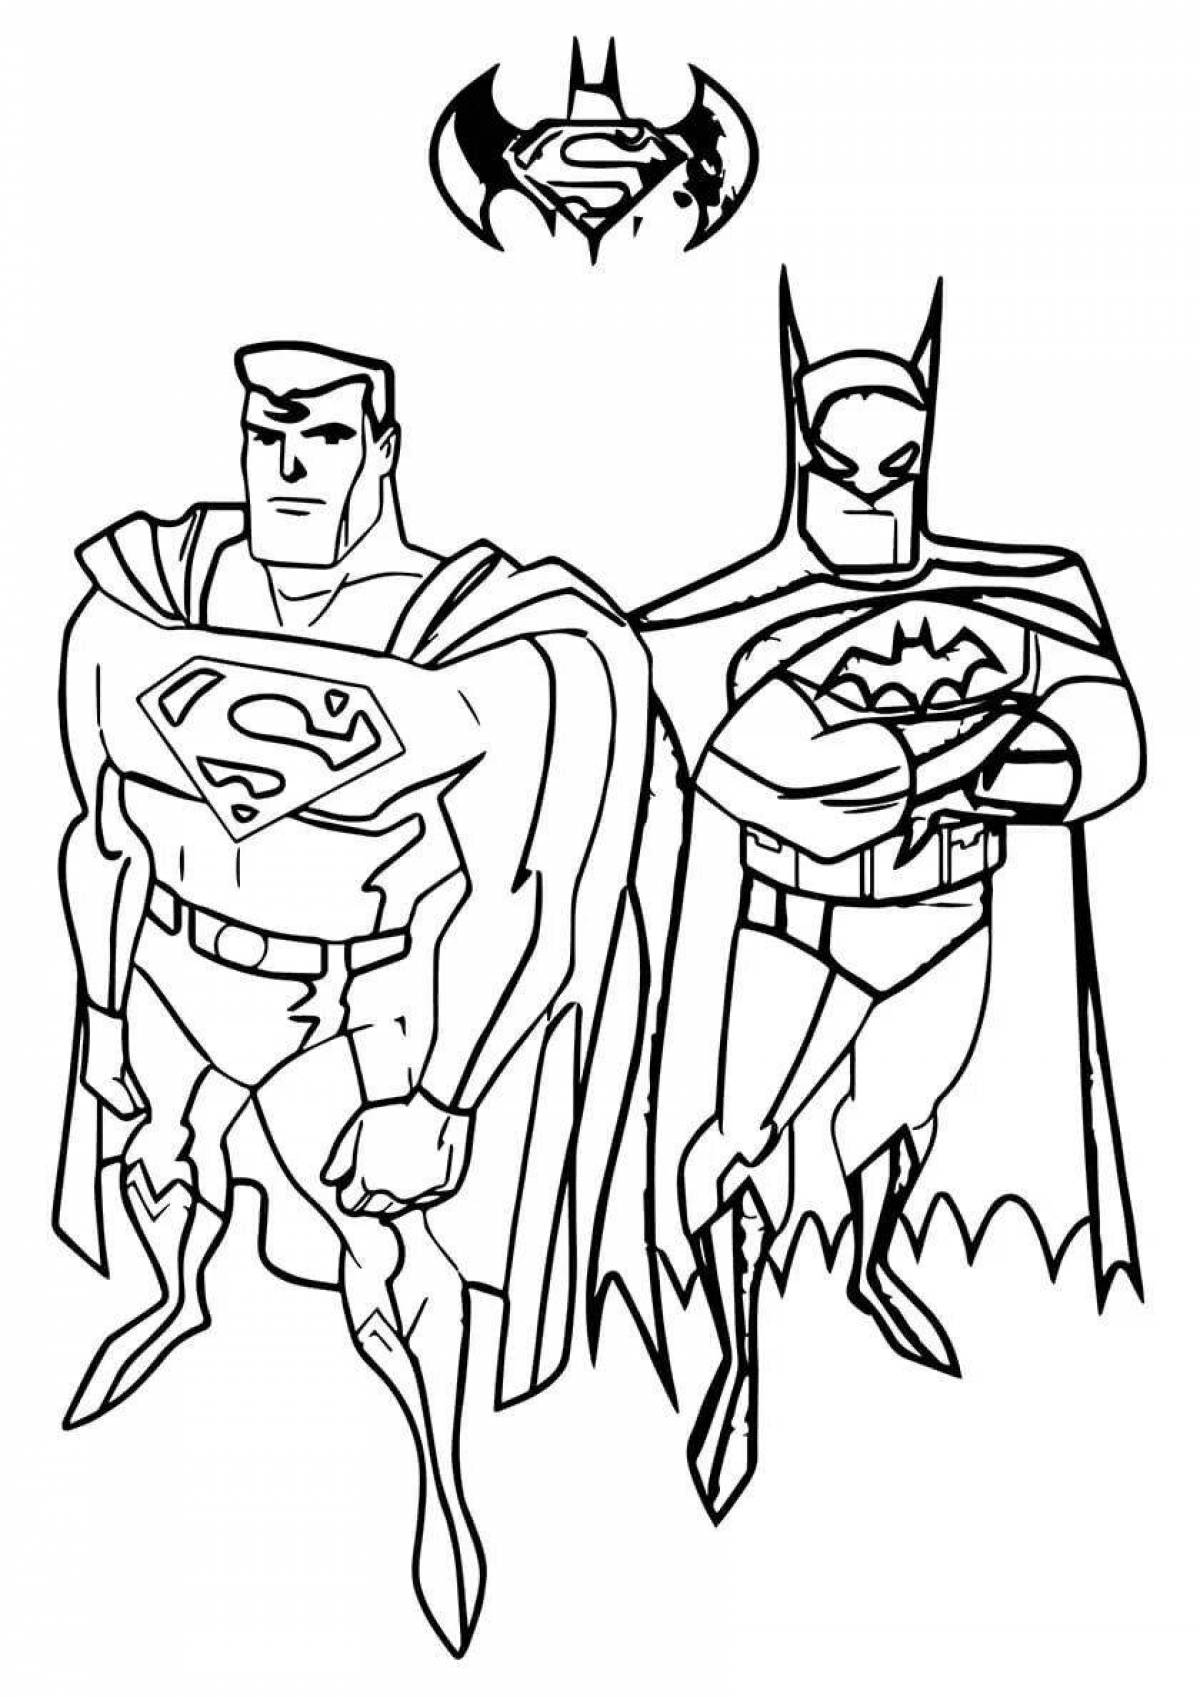 Amazing superhero coloring pages for 6-7 year olds